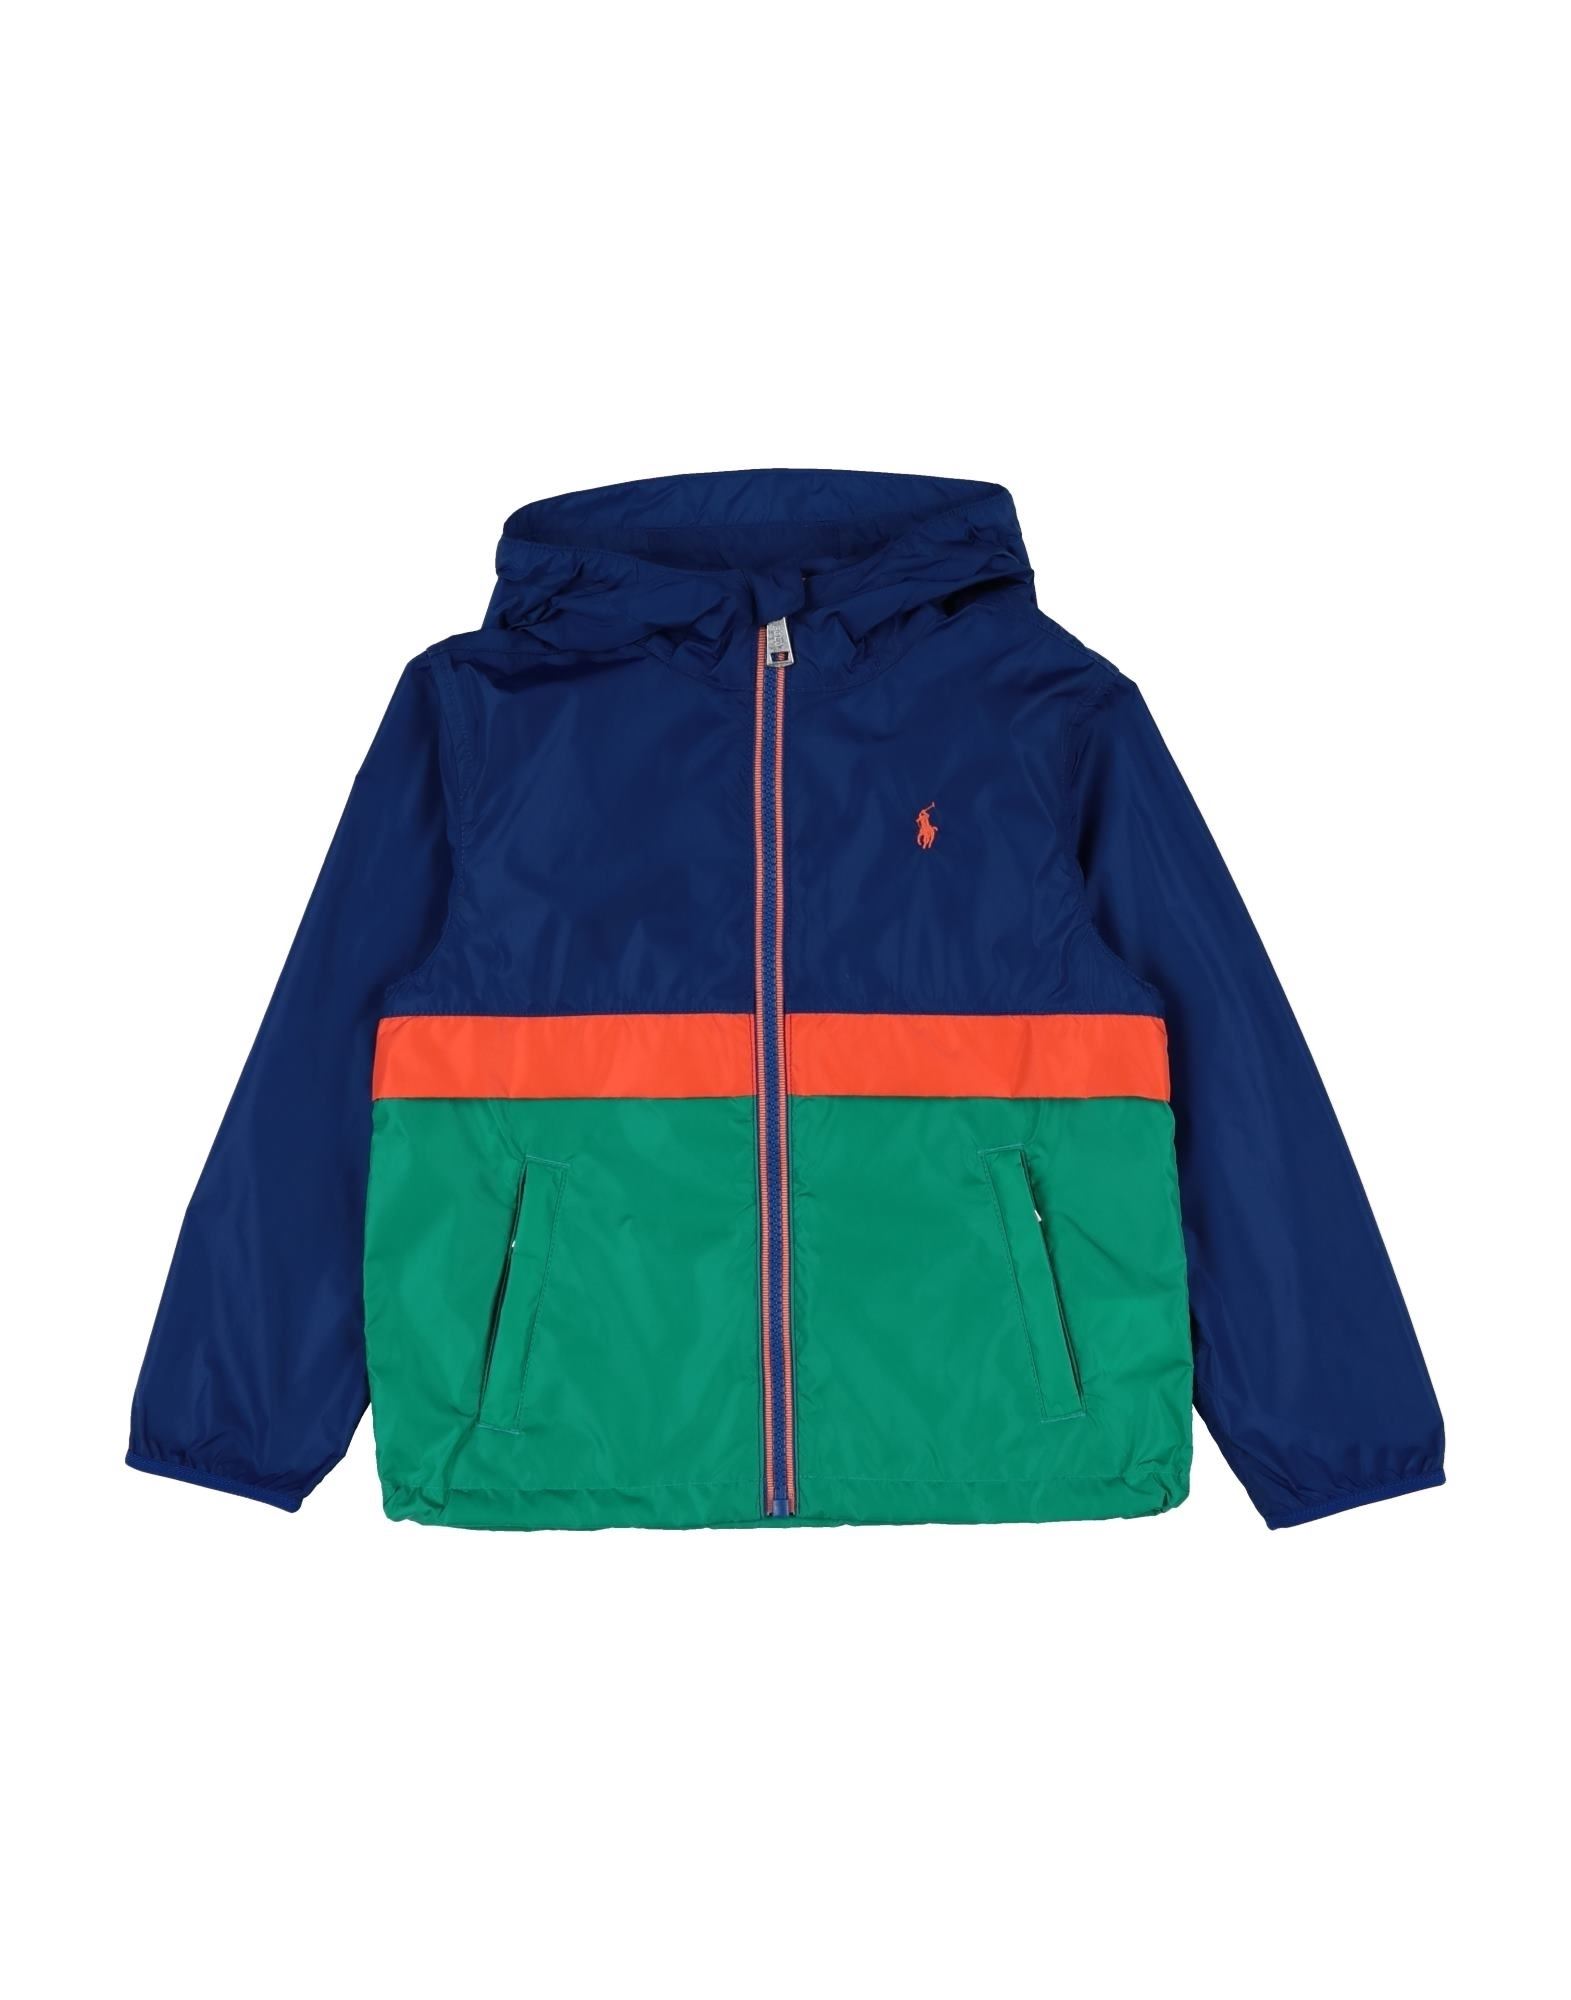 ＜YOOX＞ ★19%OFF！RALPH LAUREN ボーイズ 3-8 歳 ブルゾン ブルー 6 ナイロン 100% Color-Blocked Hooded Jacket画像